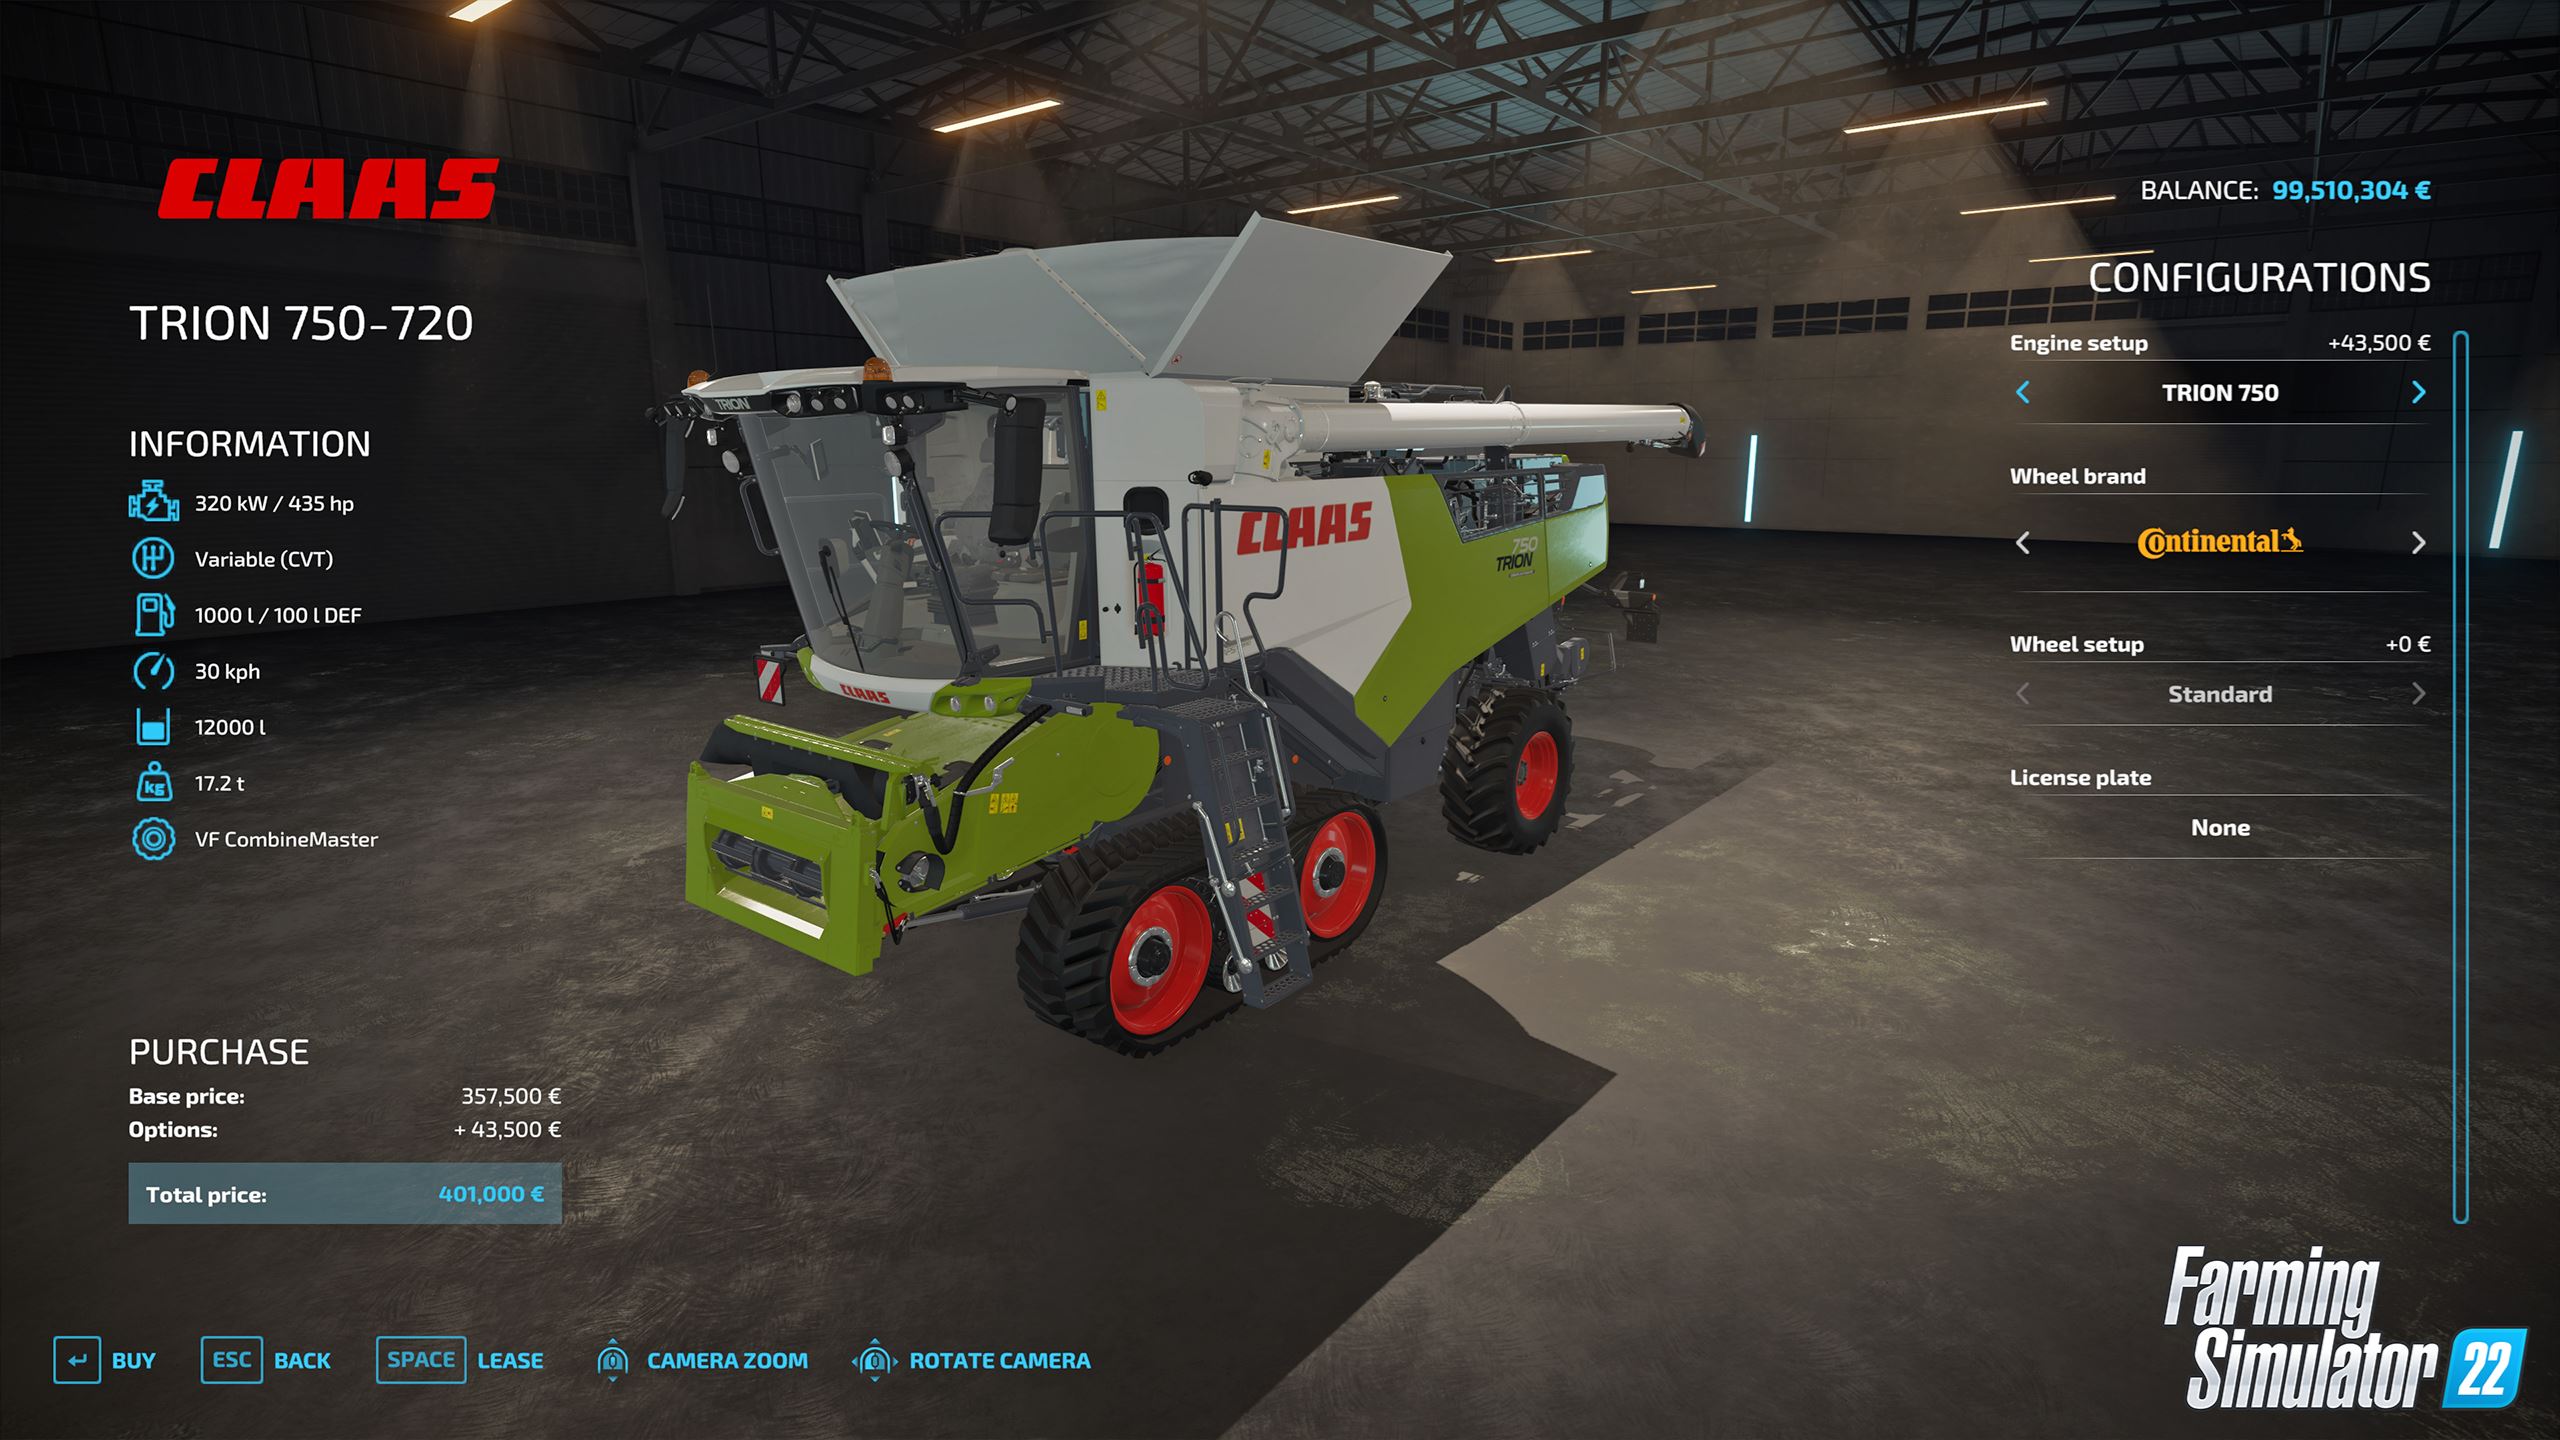 does farming simulator 22 have mods